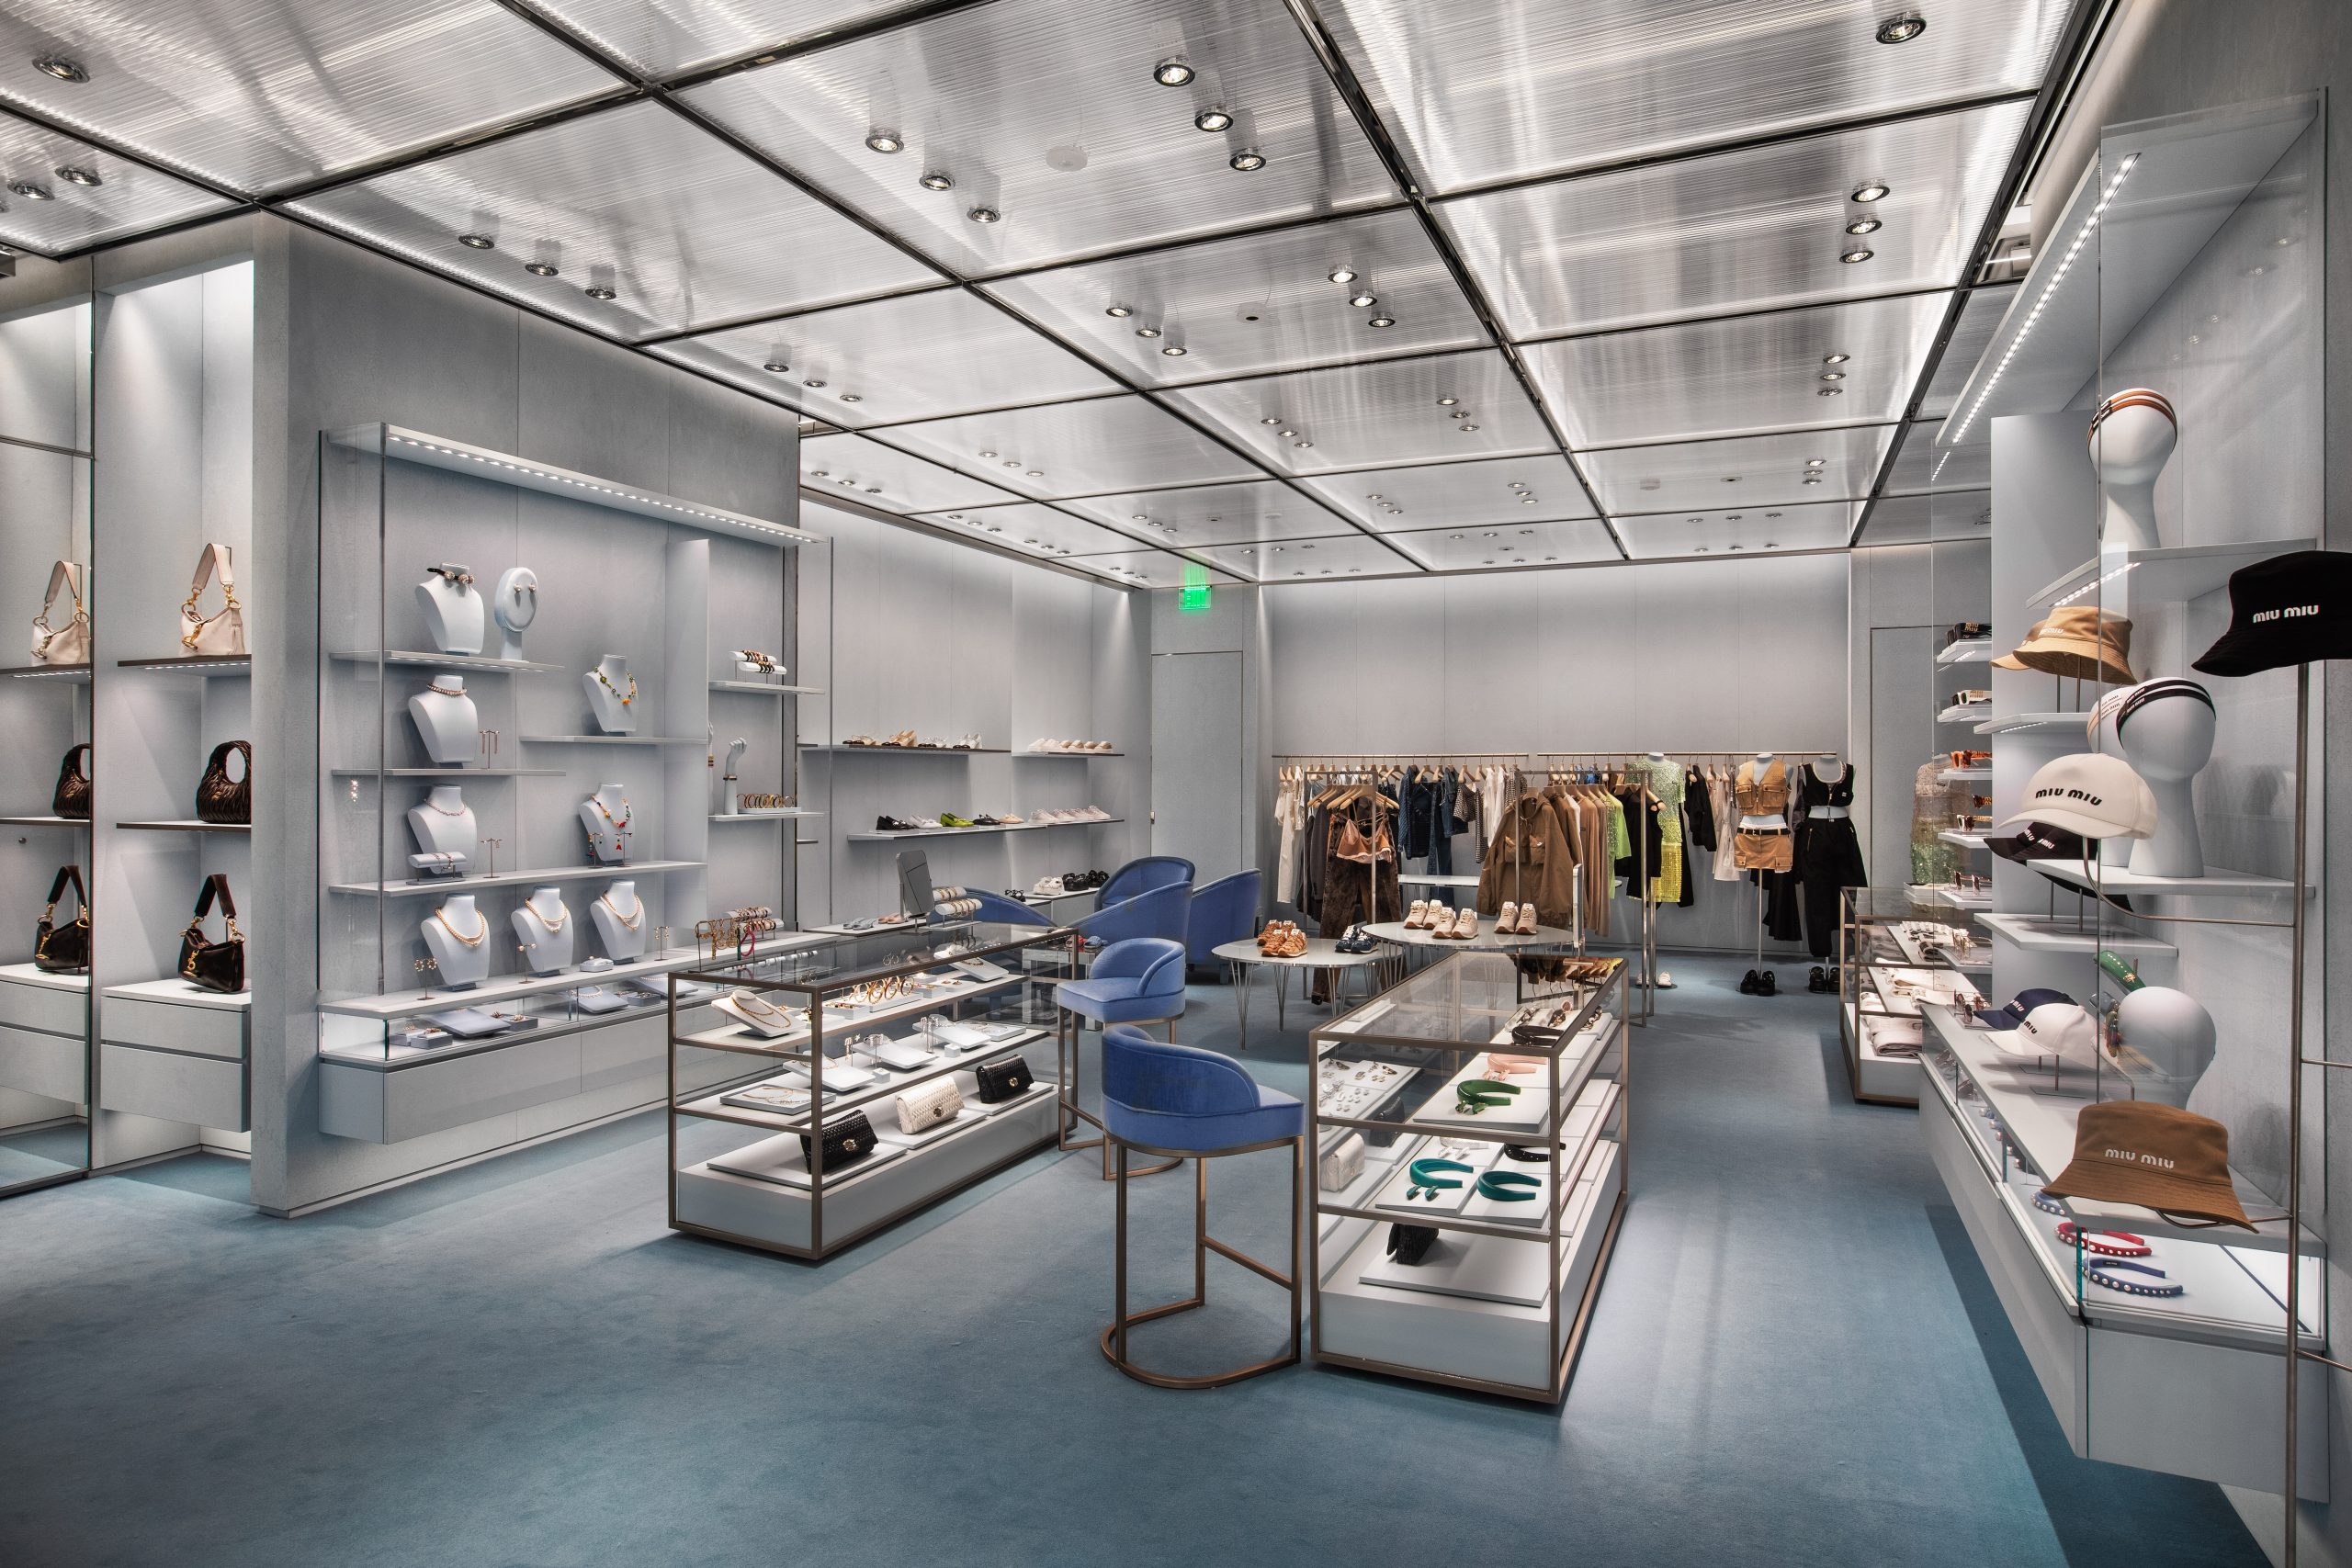 JRM Construction Management Completes Interior Fitout Of Sugarfina At South  Coast Plaza